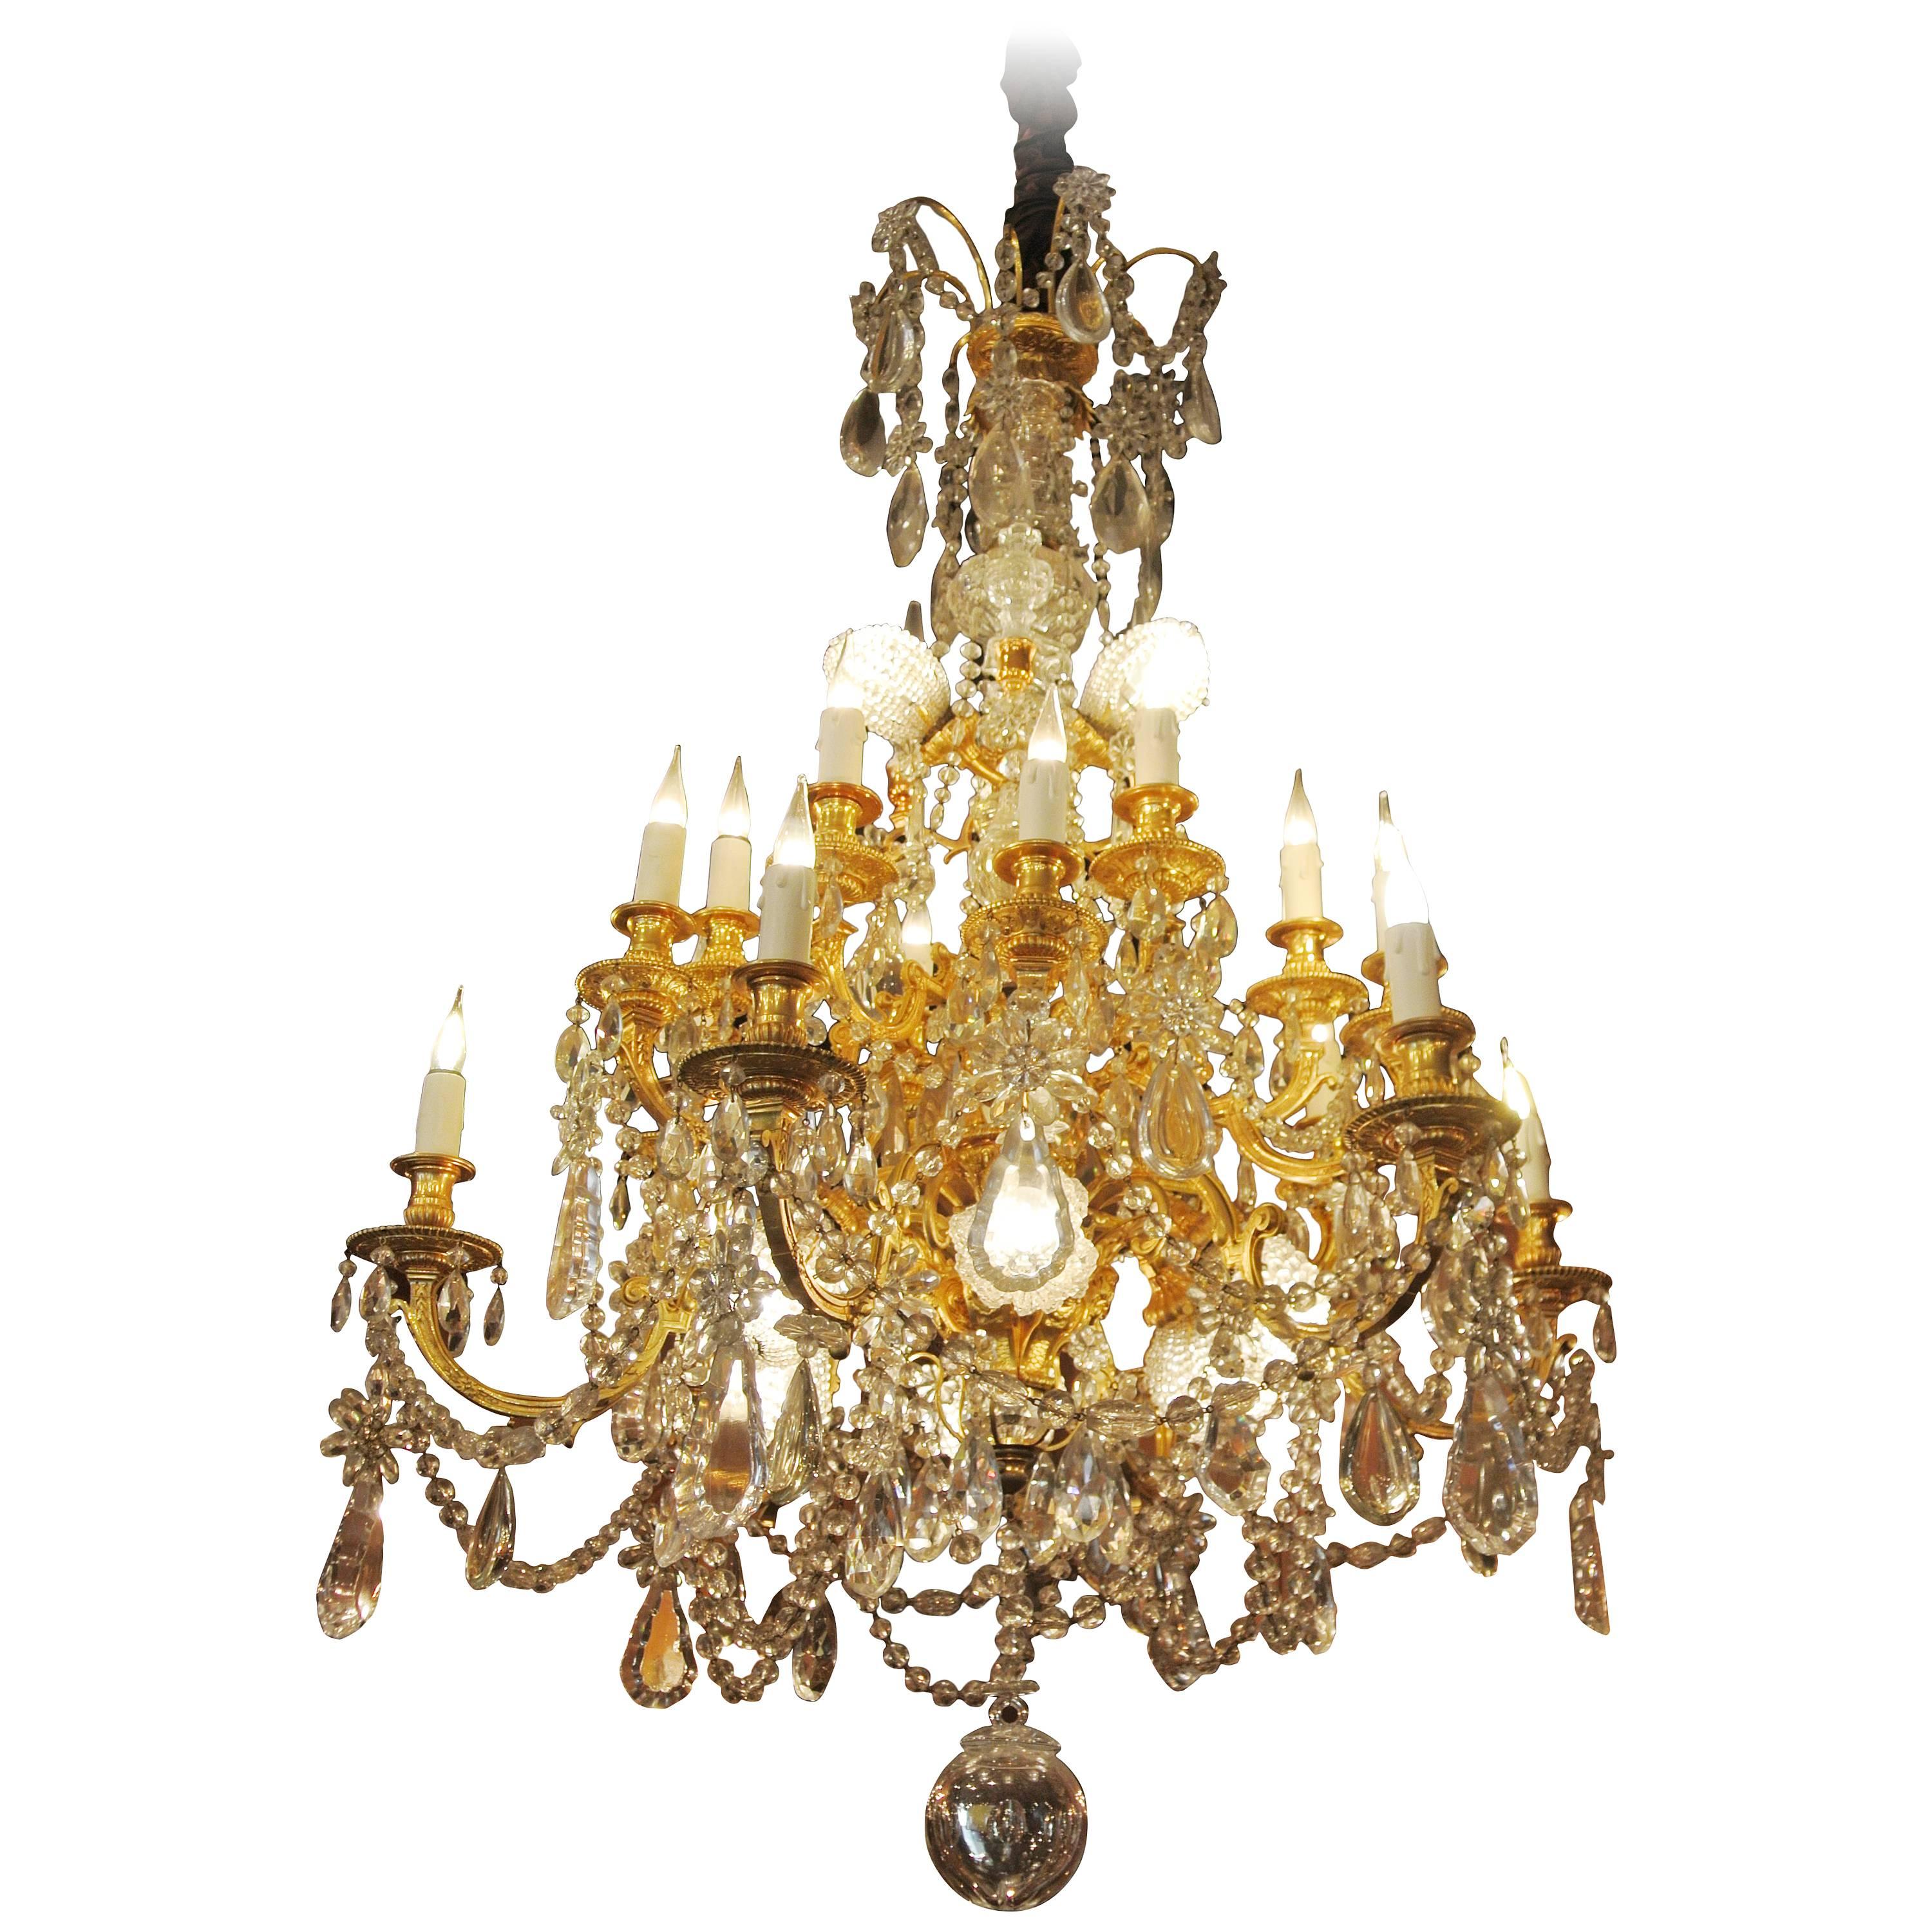 A Fine Important Baccarat Crystal Chandelier in Bronze Dore and Carved Crystal